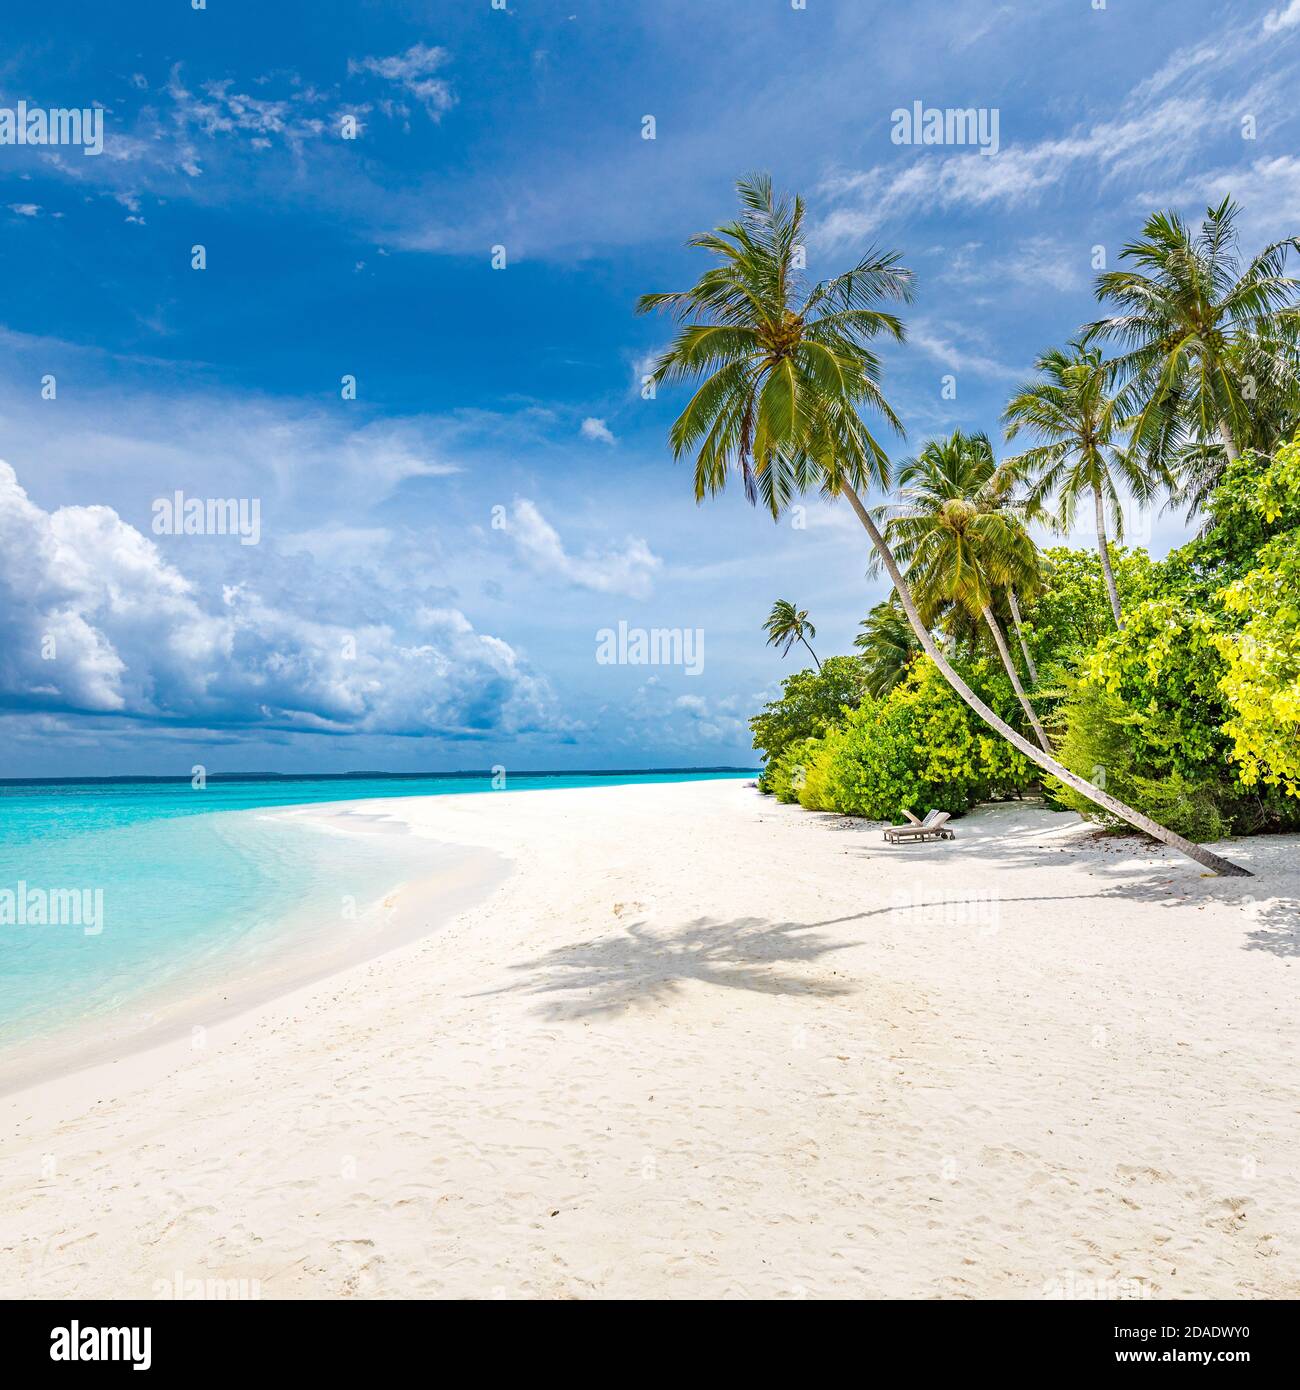 Maldives paradise tropical beach. Amazing view, blue turquoise lagoon water, palm trees and white sandy beach. Luxury travel vacation destination Stock Photo